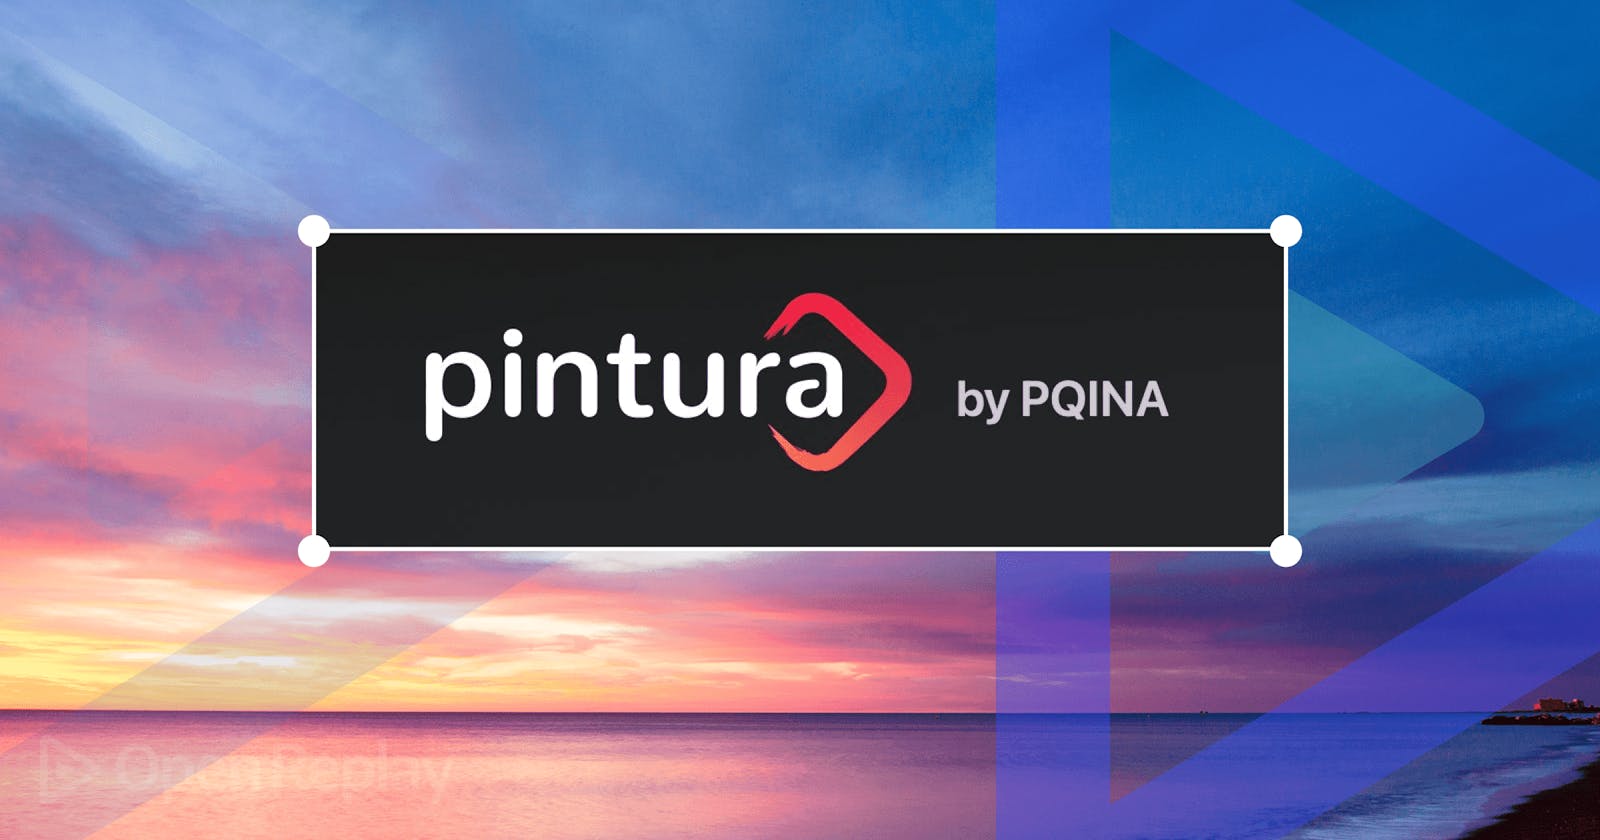 Add An Image Editor To Your App With Pintura